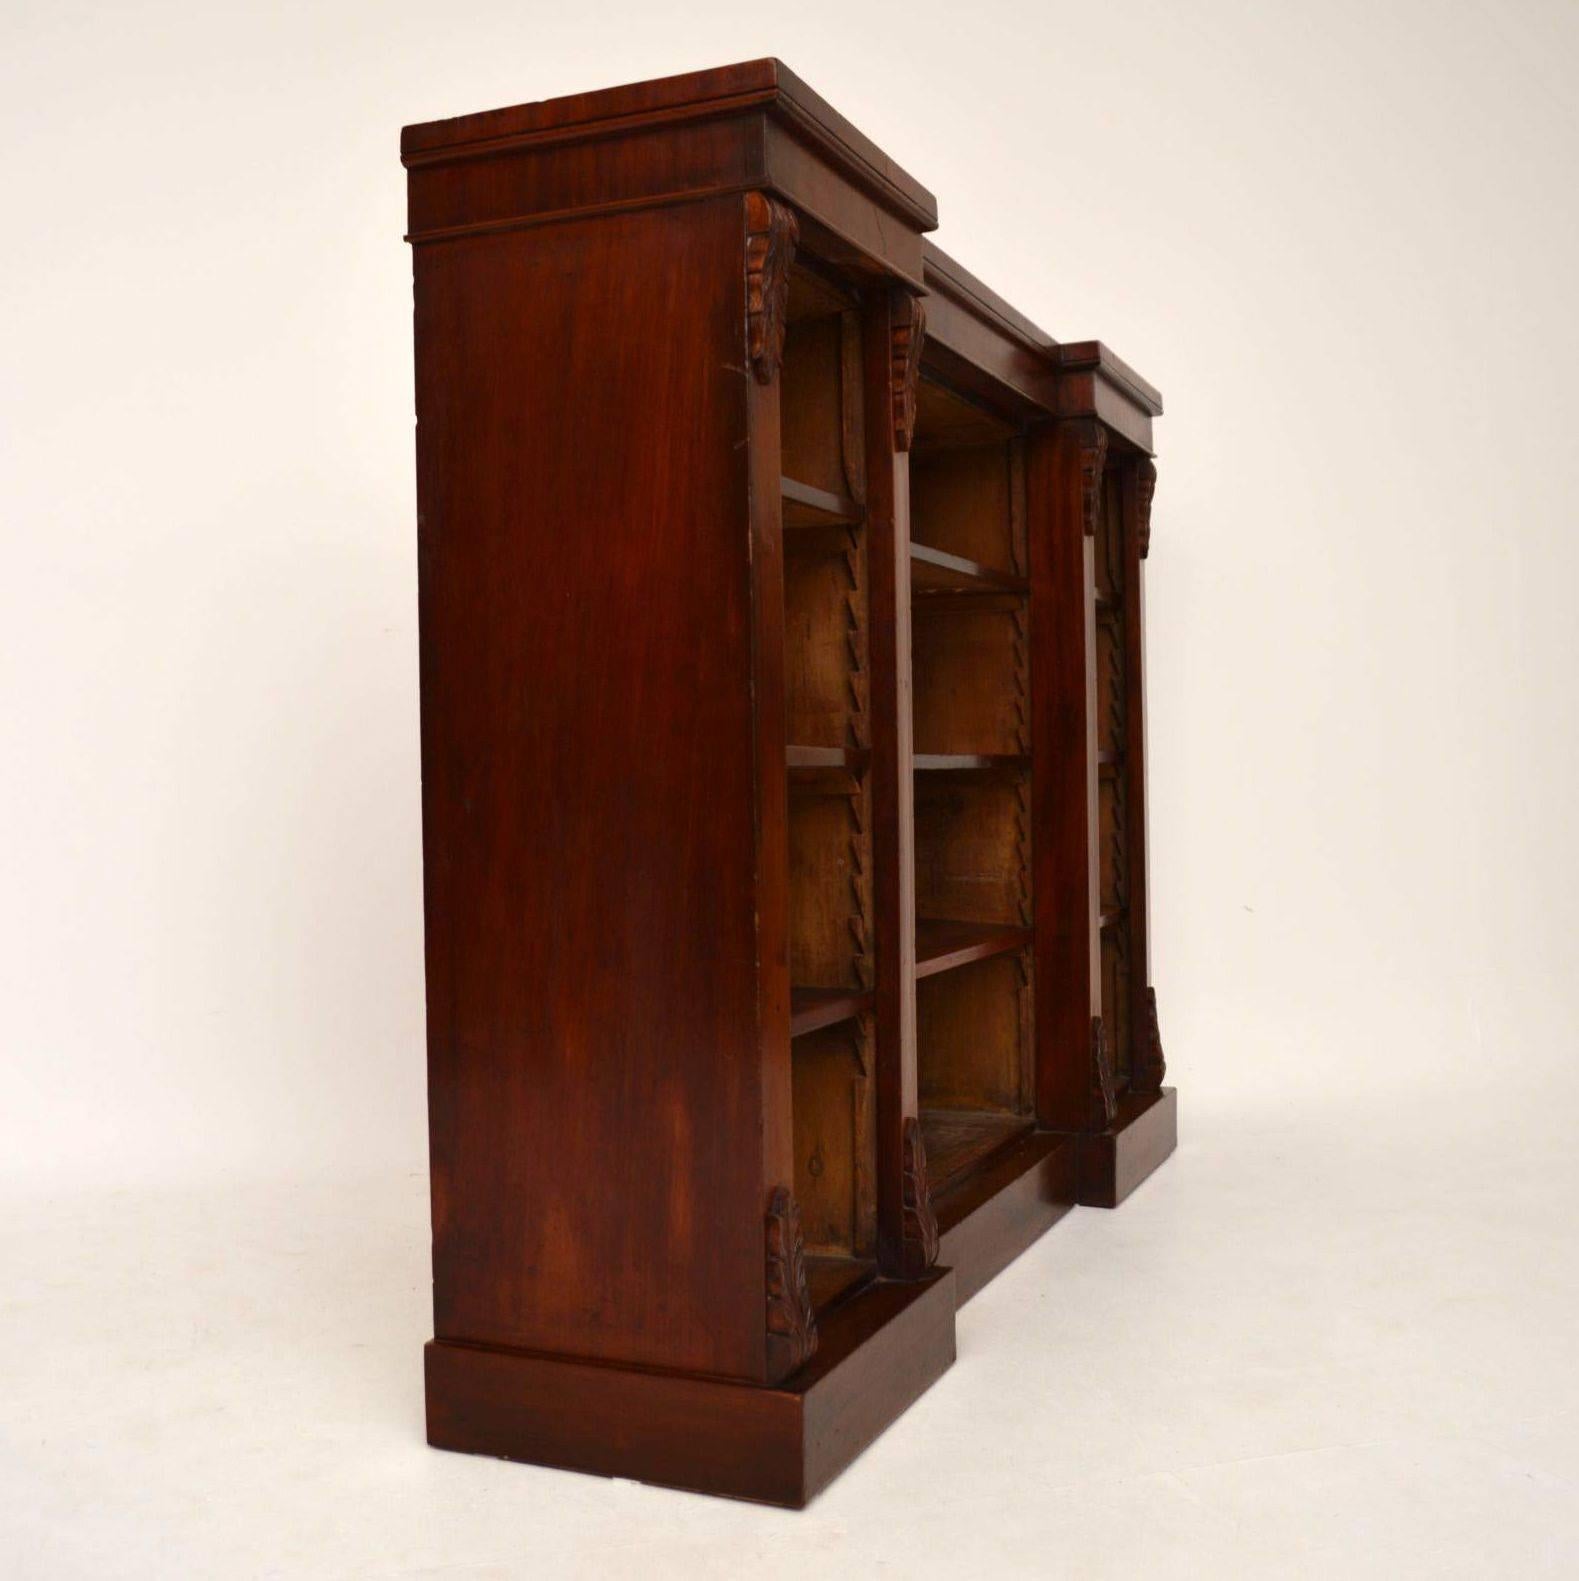 Antique Victorian mahogany dwarf bookcase with an inverted breakfront and carved corbels top and bottom. It's in good condition and has adjustable shelves on sharks teeth supports. This bookcase sits on a plinth base & has the original pine panelled